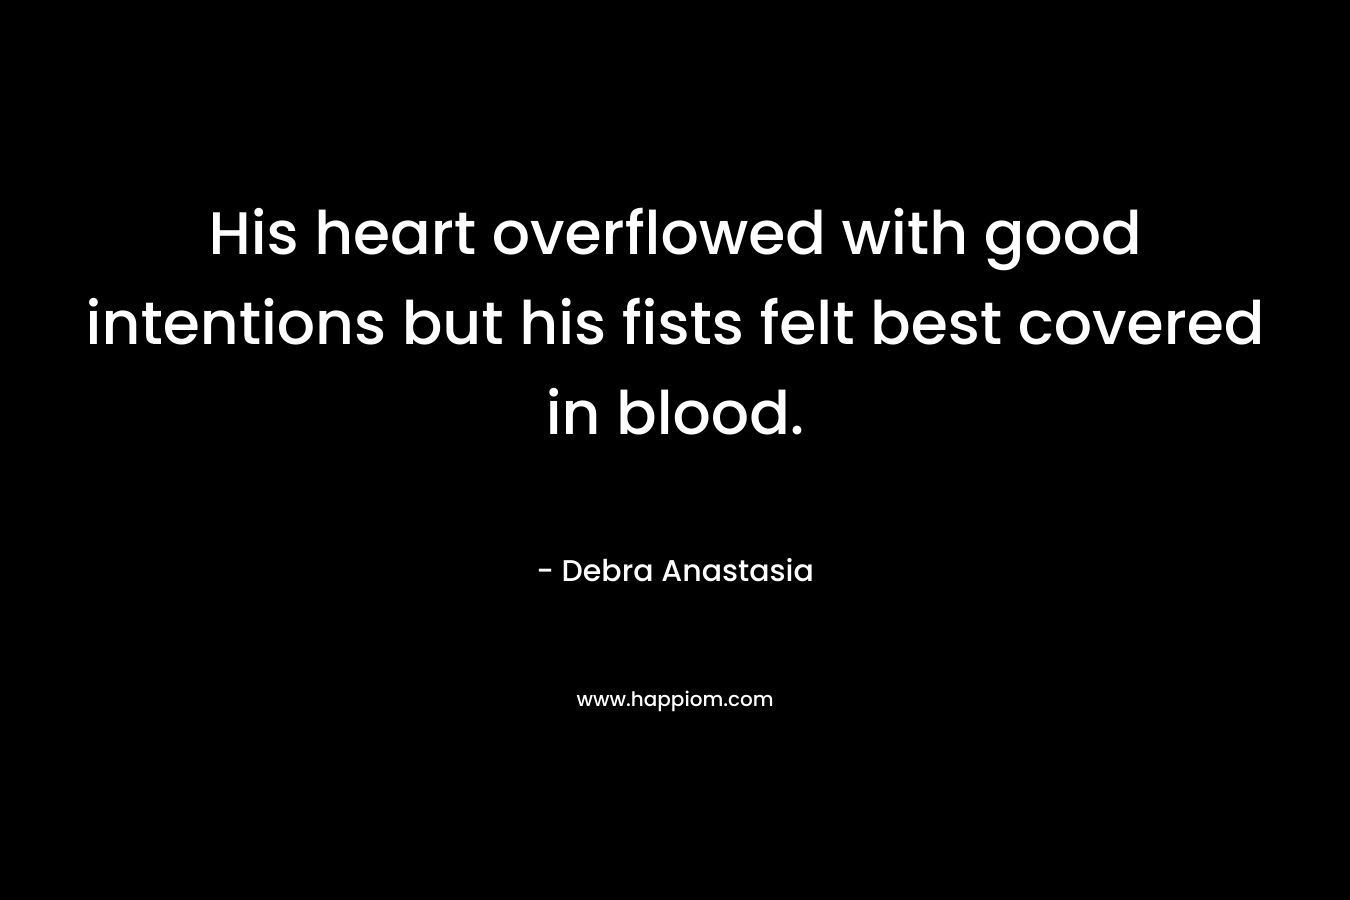 His heart overflowed with good intentions but his fists felt best covered in blood.